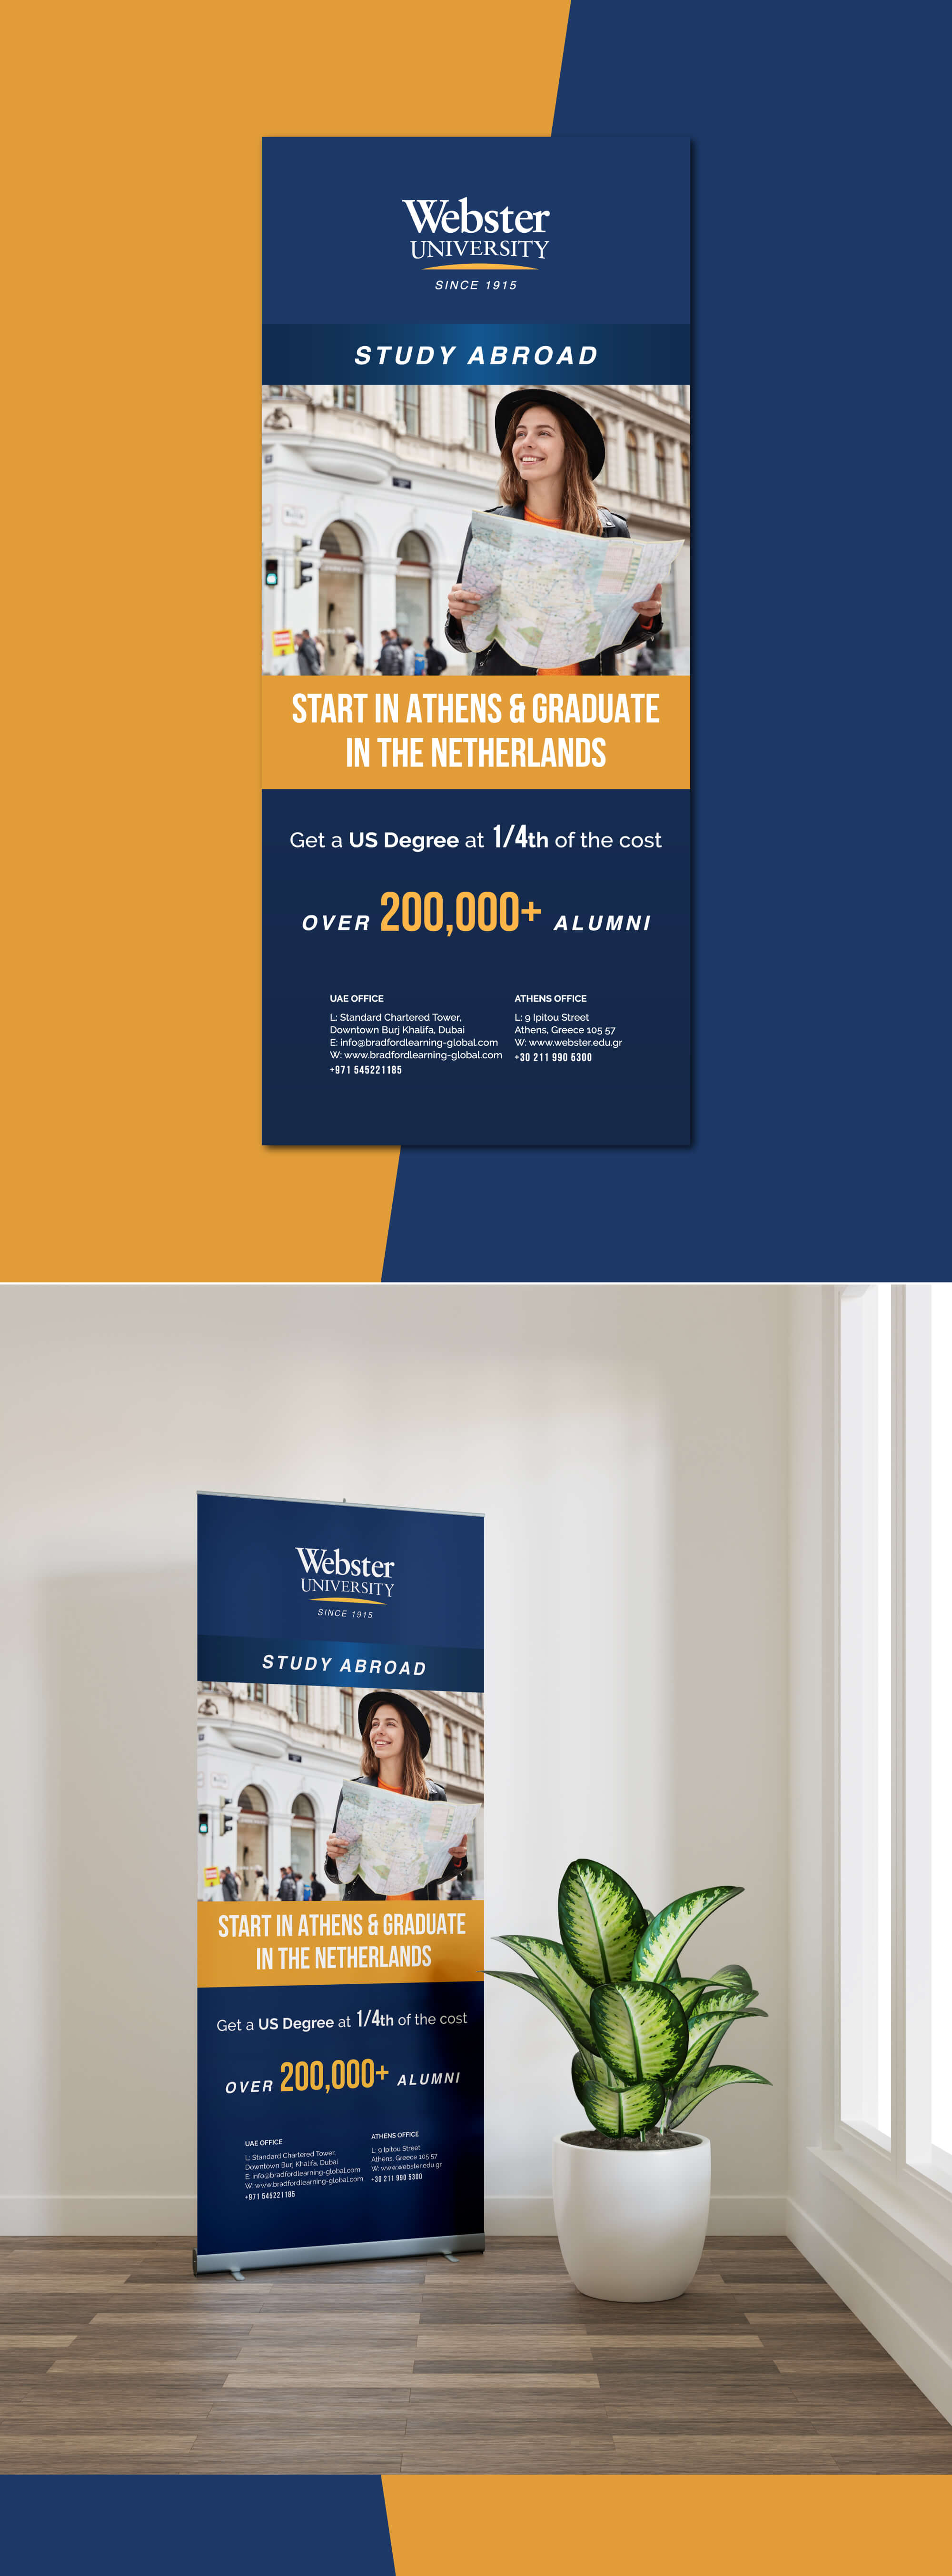 Webster University Roll Up Banner by SAJID SULAIMAN